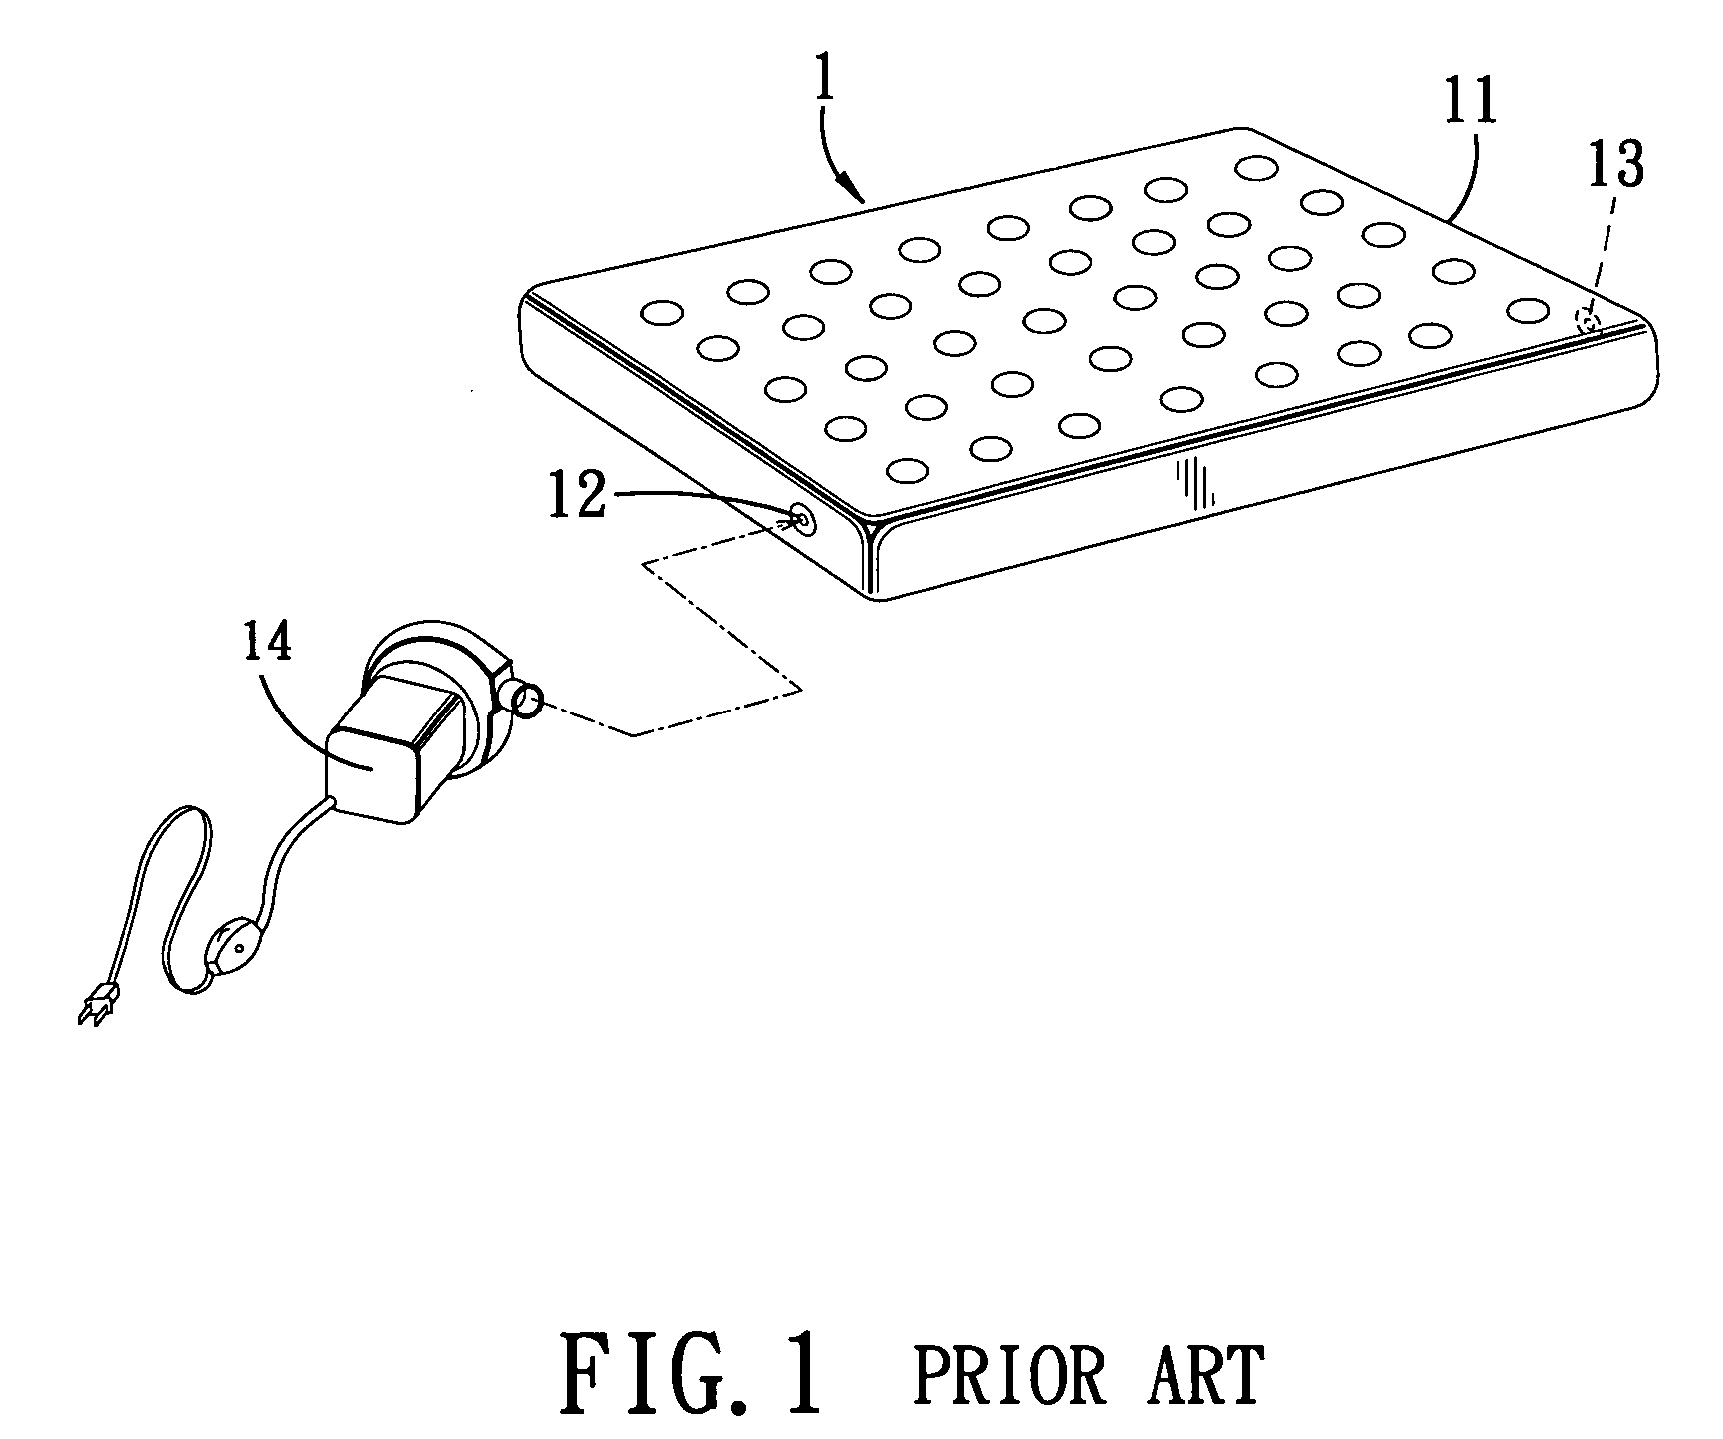 Air pump assembly for inflating and deflating an inflatable article